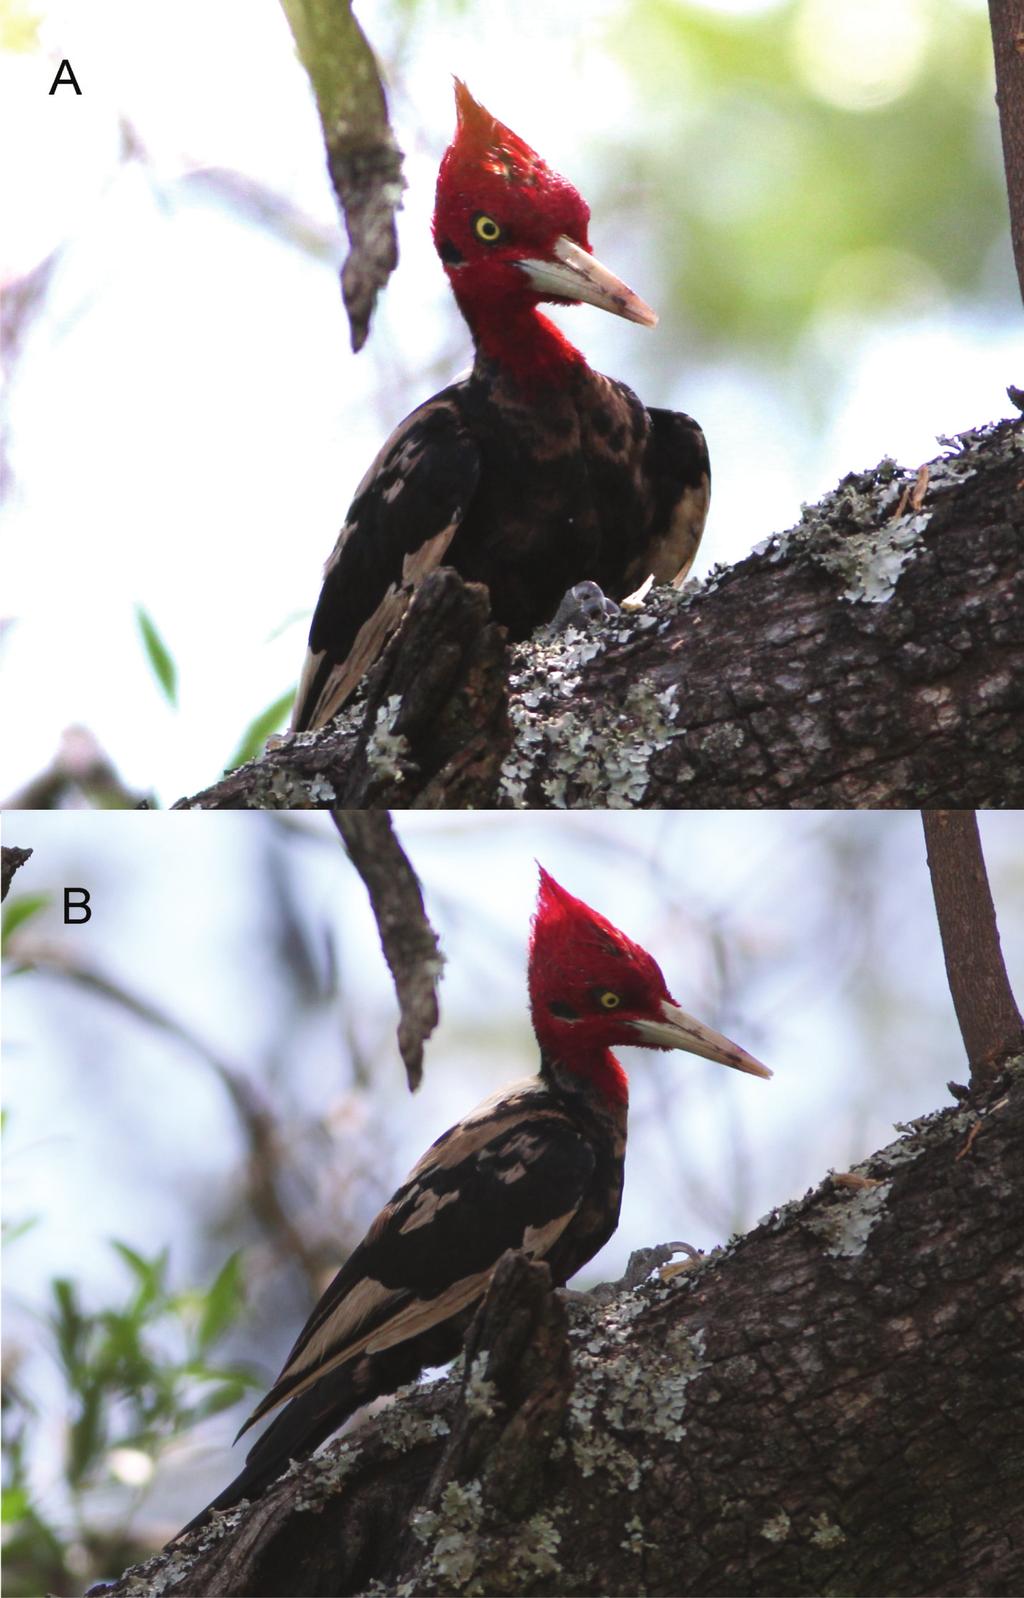 SHORT COMMUNICATIONS FIG. 1. Leucism/progressive graying in a Cream-backed Woodpecker (Campephilus leucopogon) from Los Molles, Argentina.